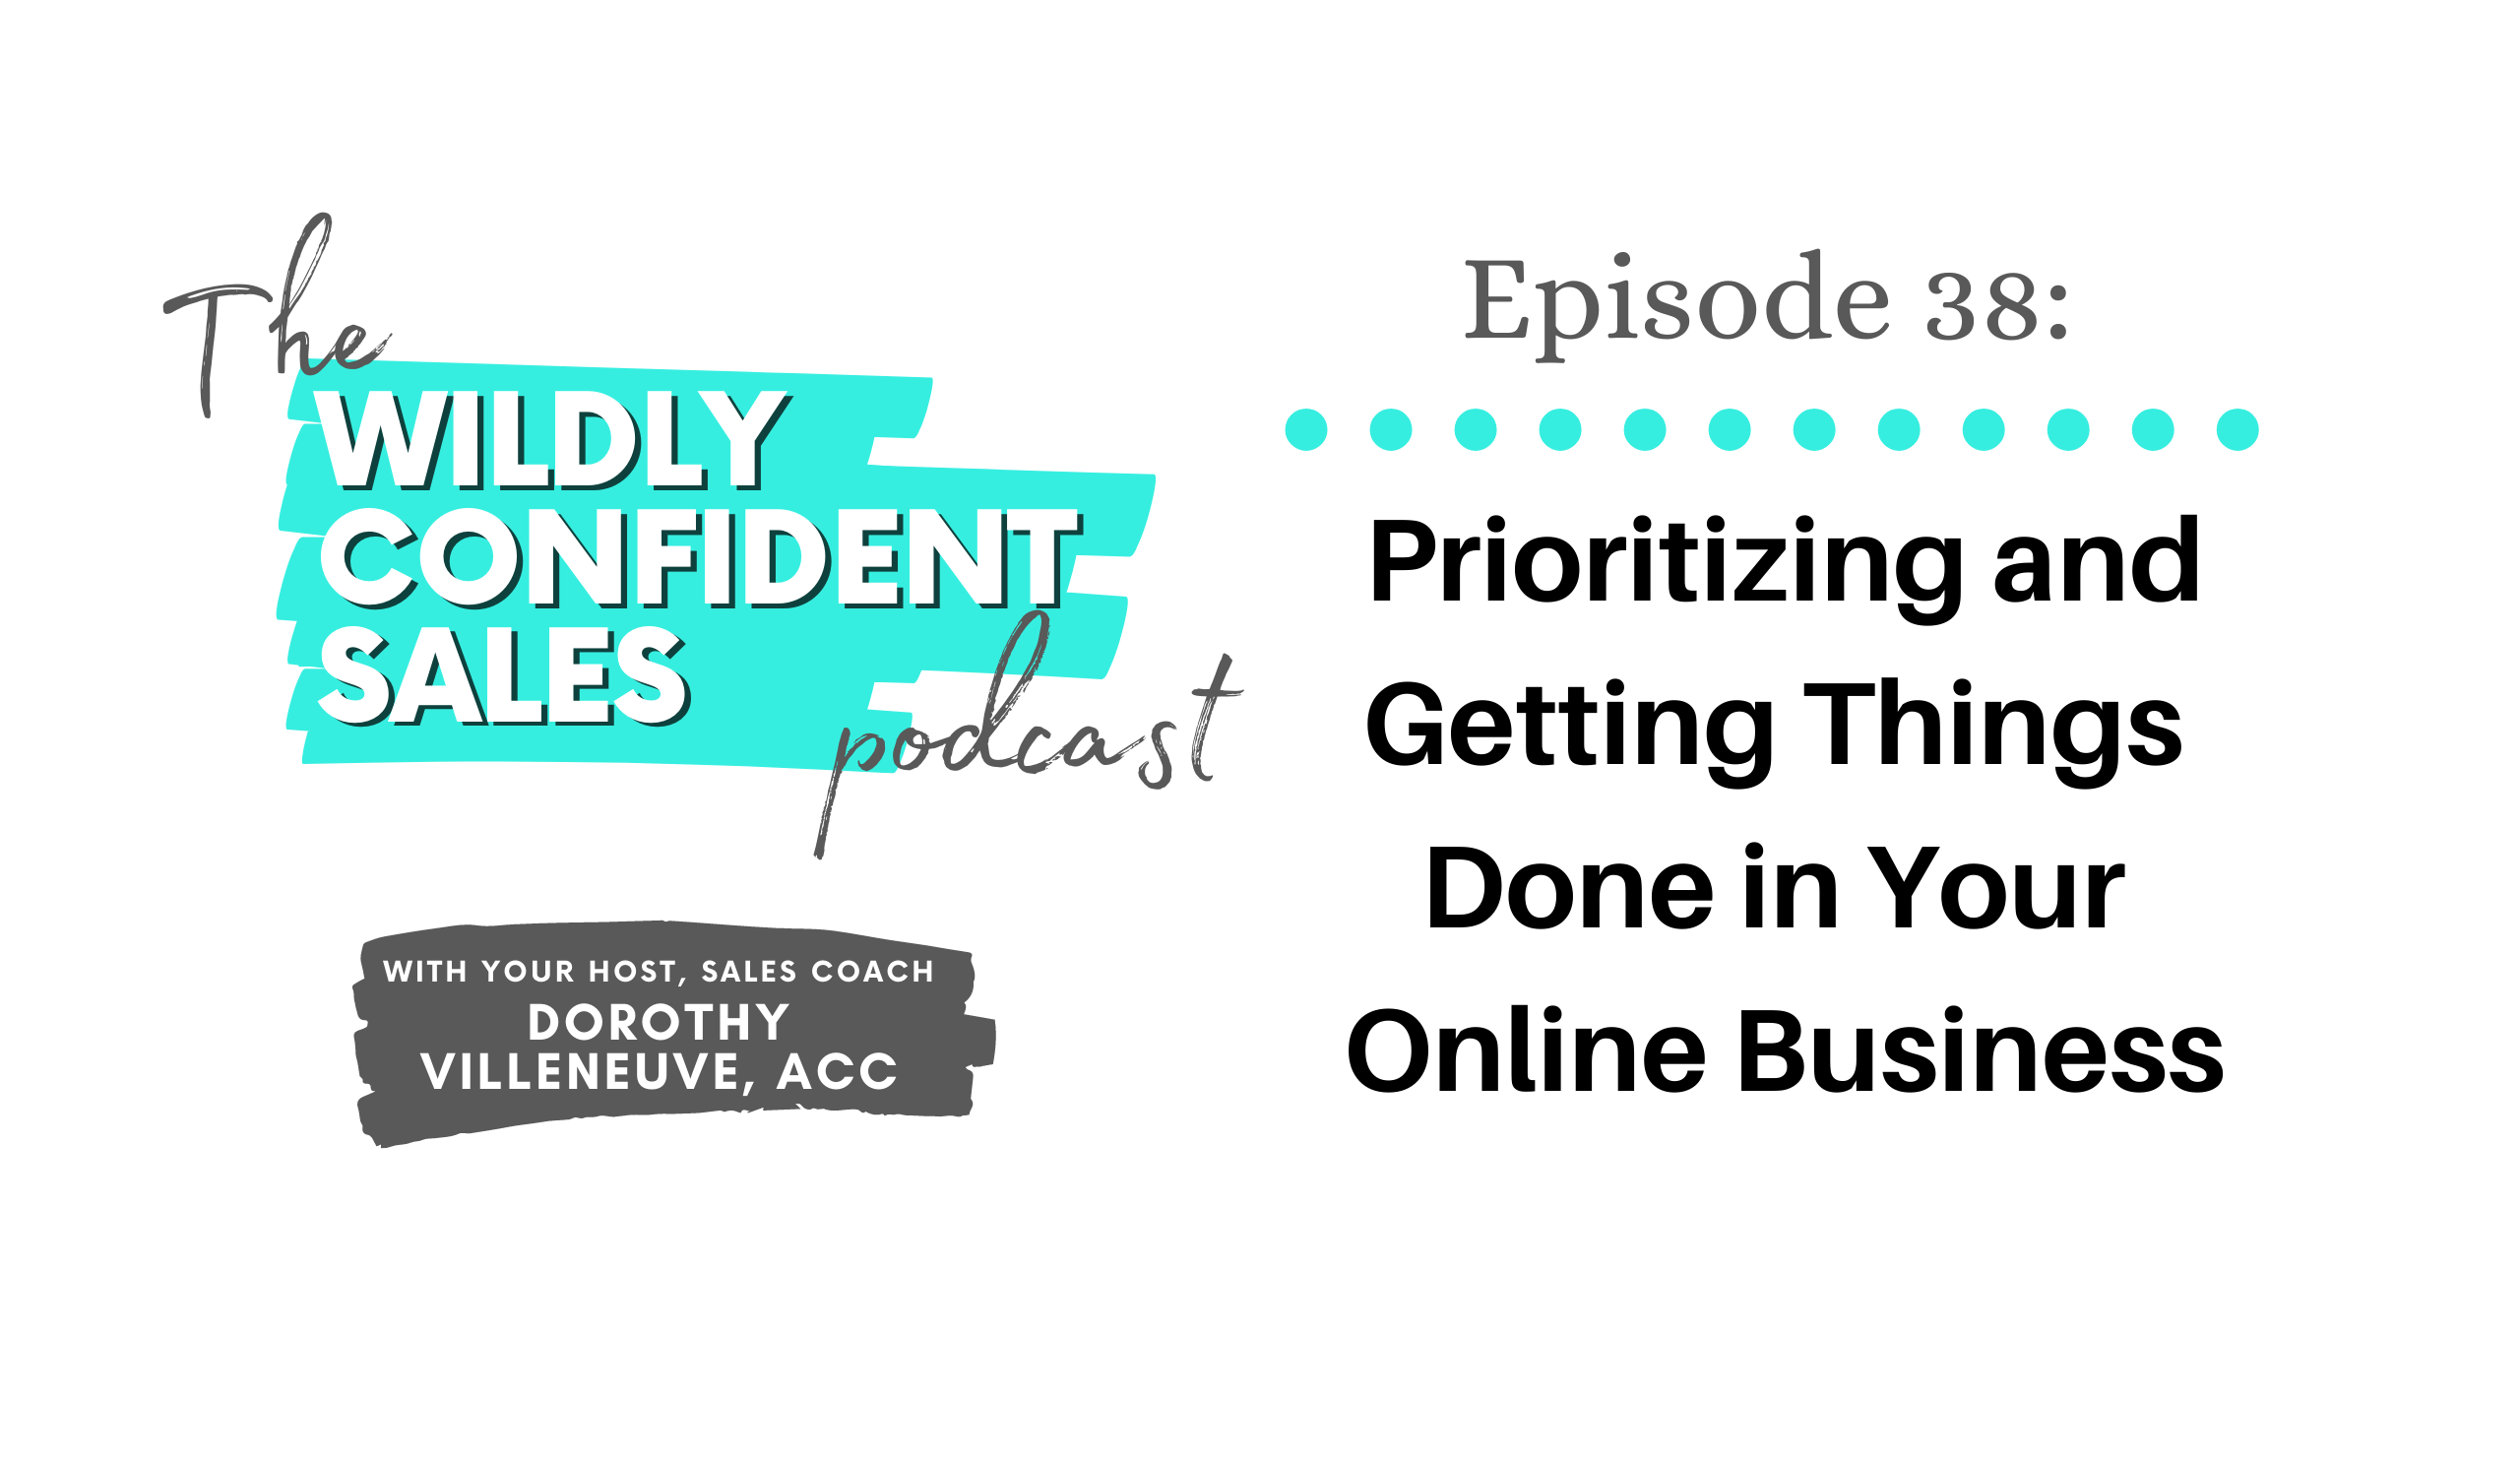 Getting Organized in Your Online Business: Prioritizing and Getting Things Done